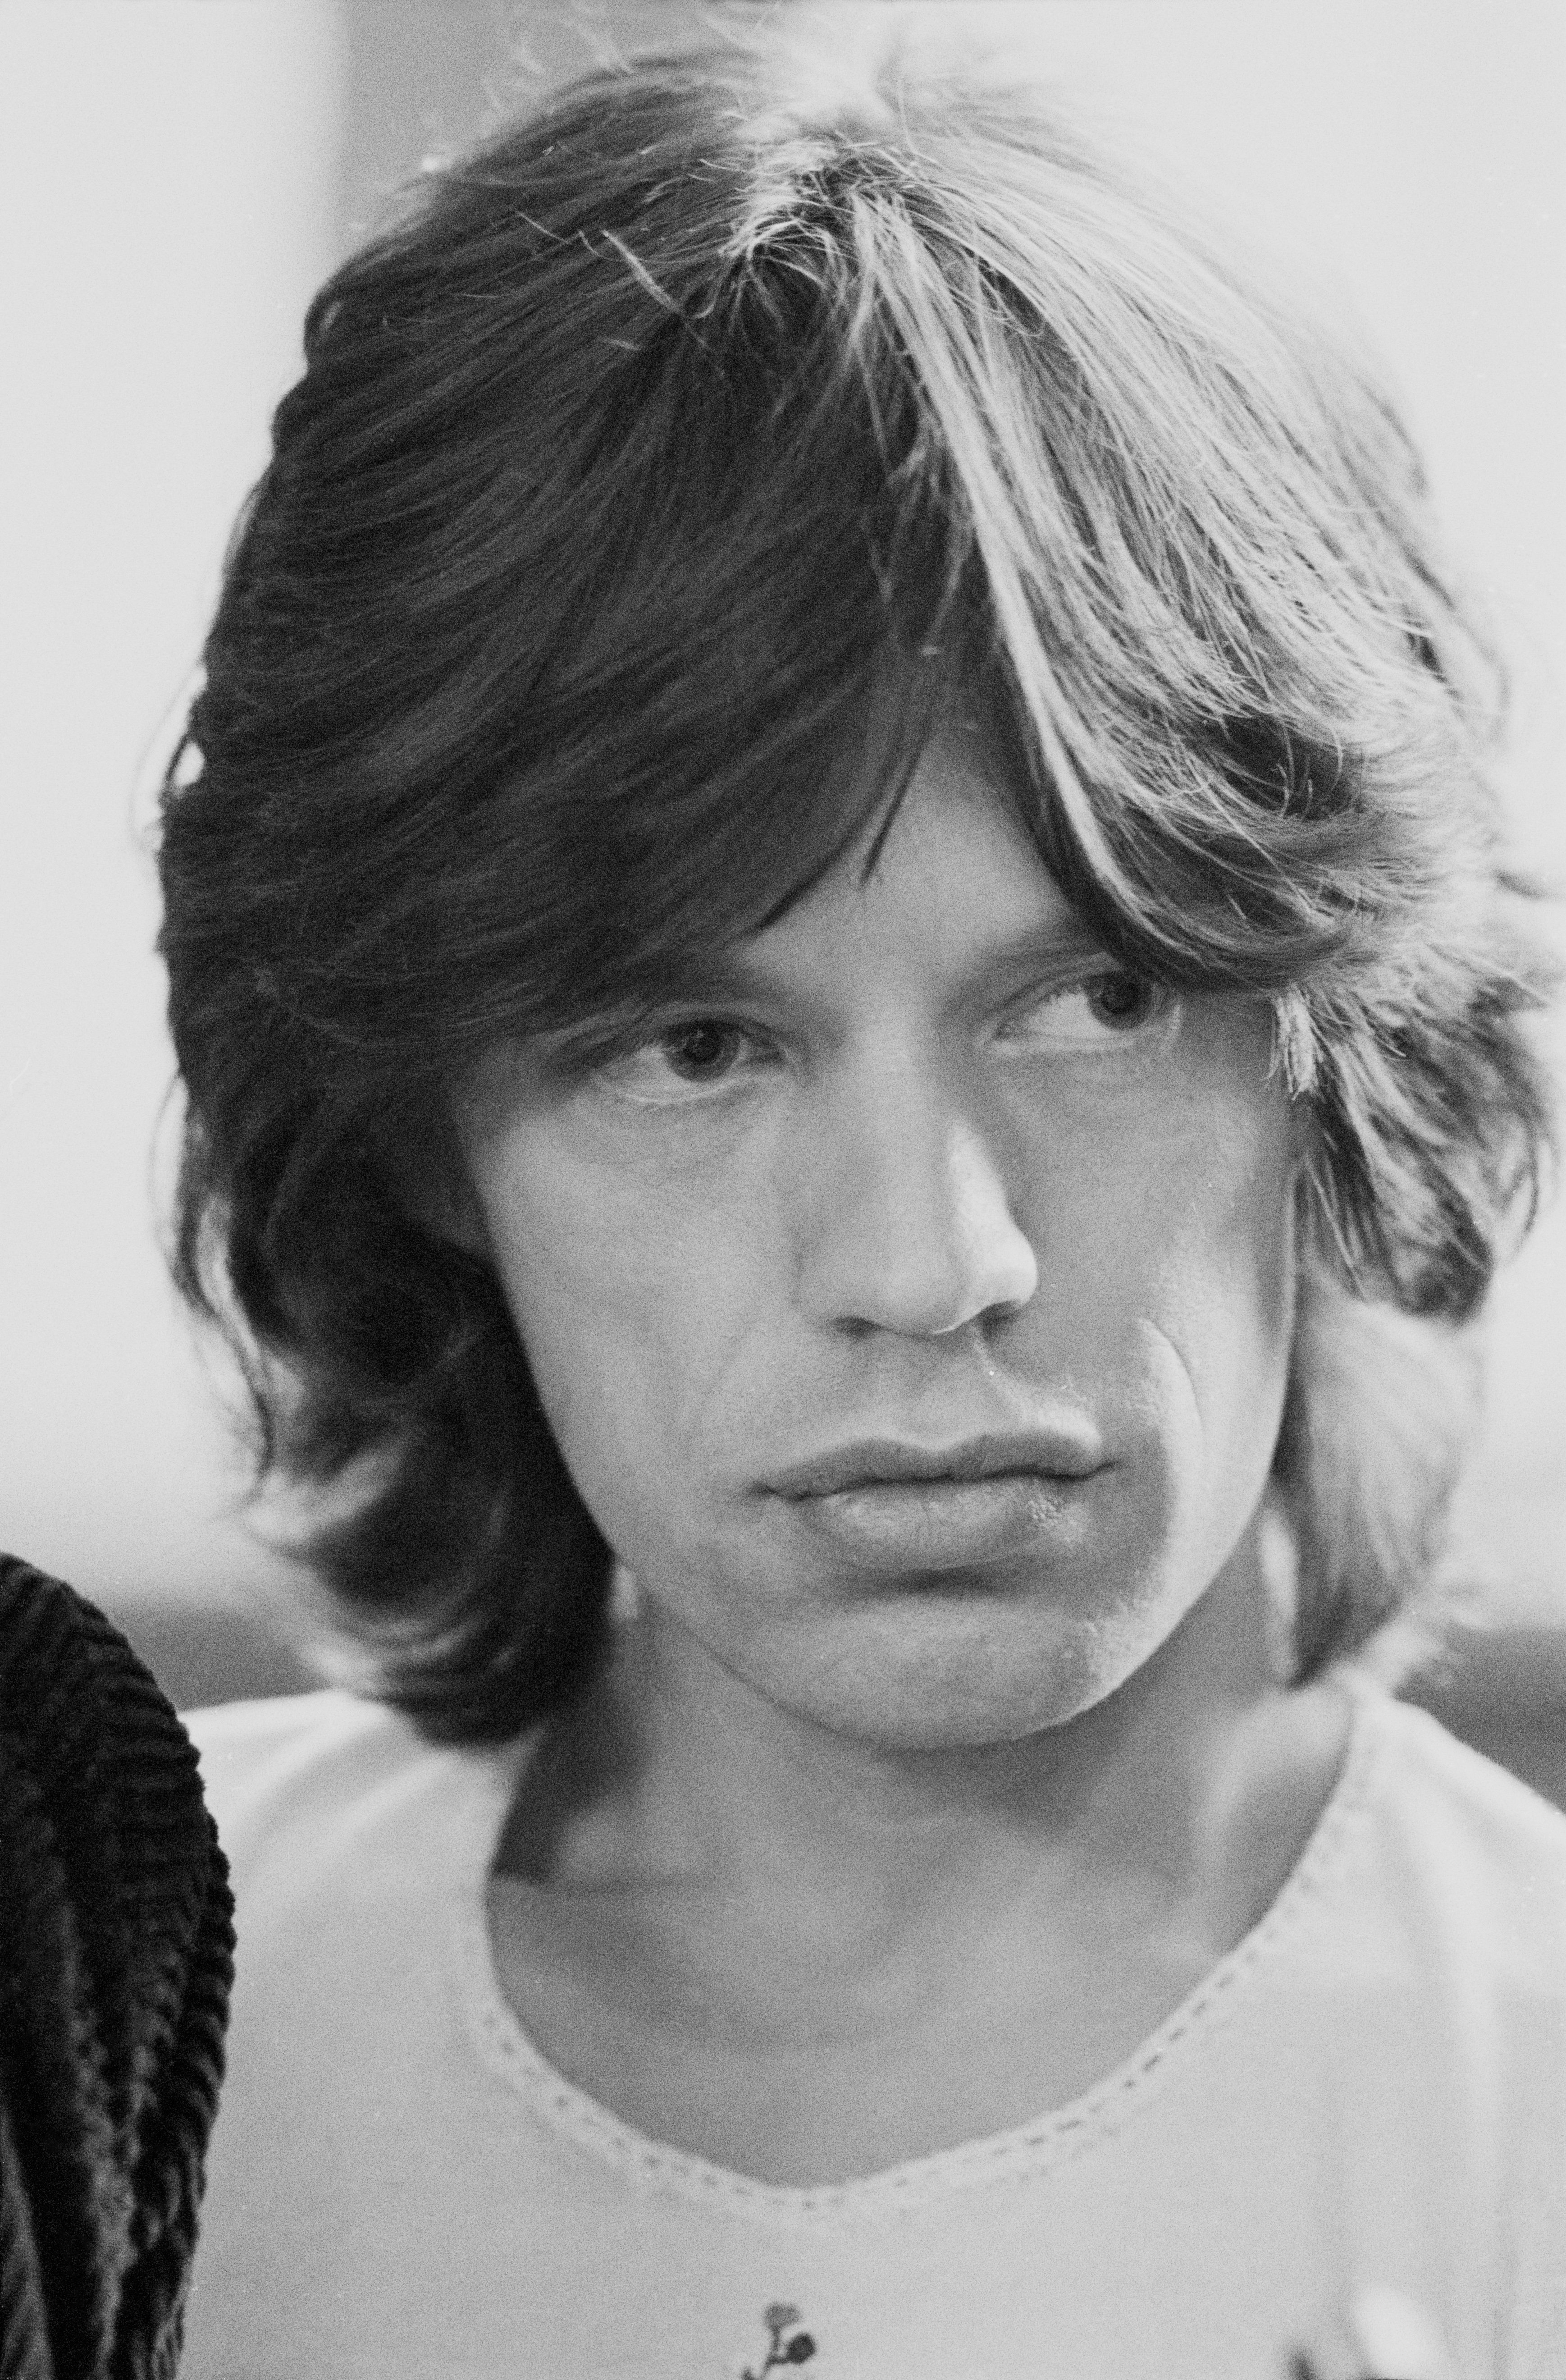 Picture taken of English singer Mick Jagger in London, 1972. | Source: Getty Images.